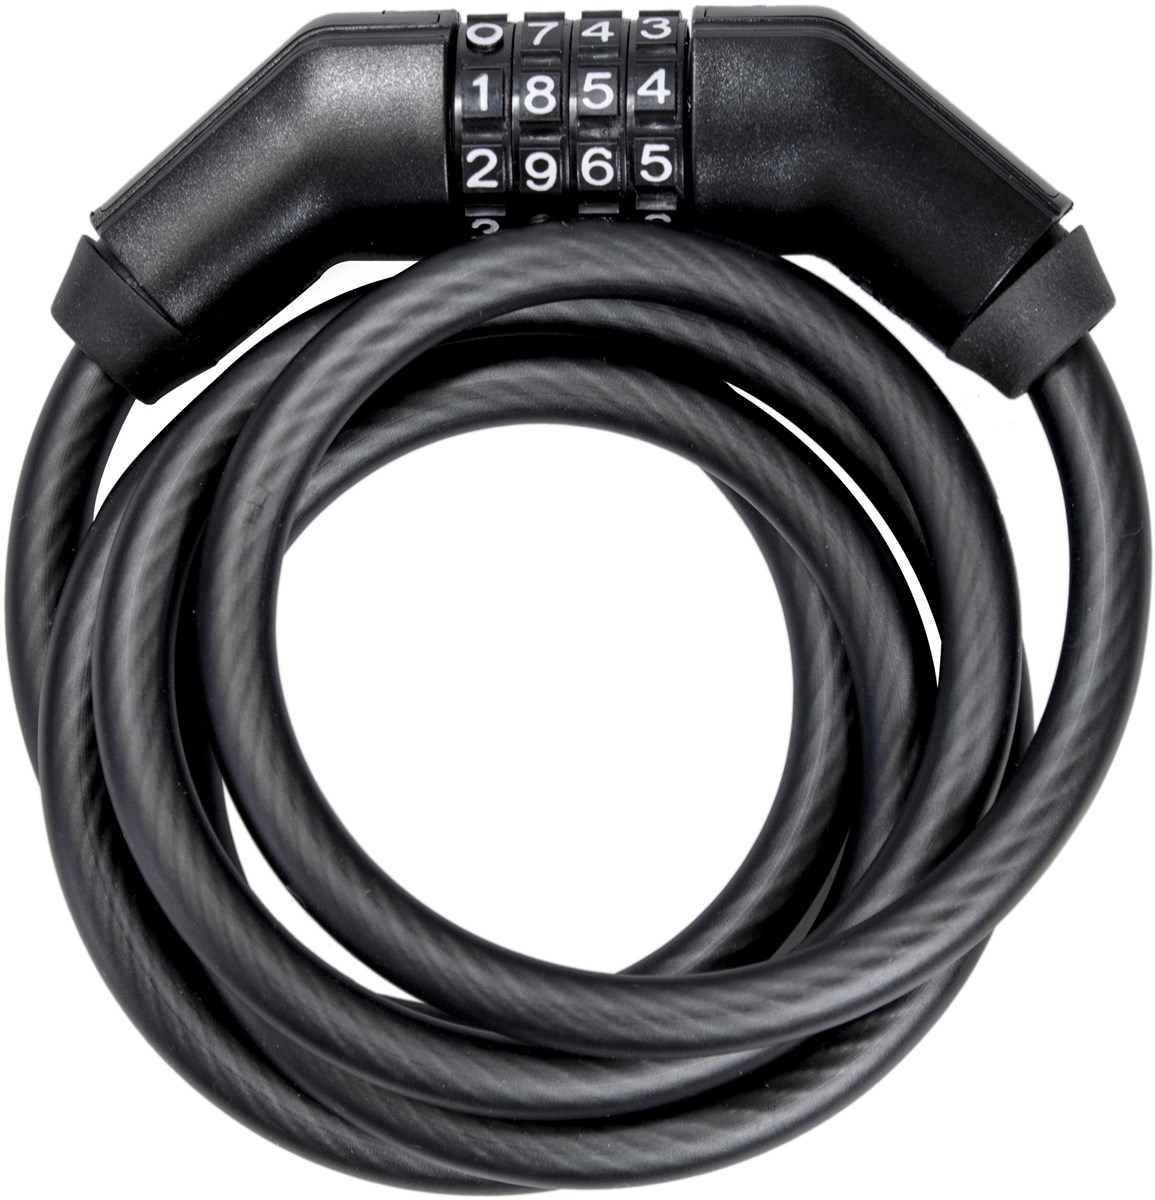 Tre-Lock Coiled Cable Lock SK260 product image